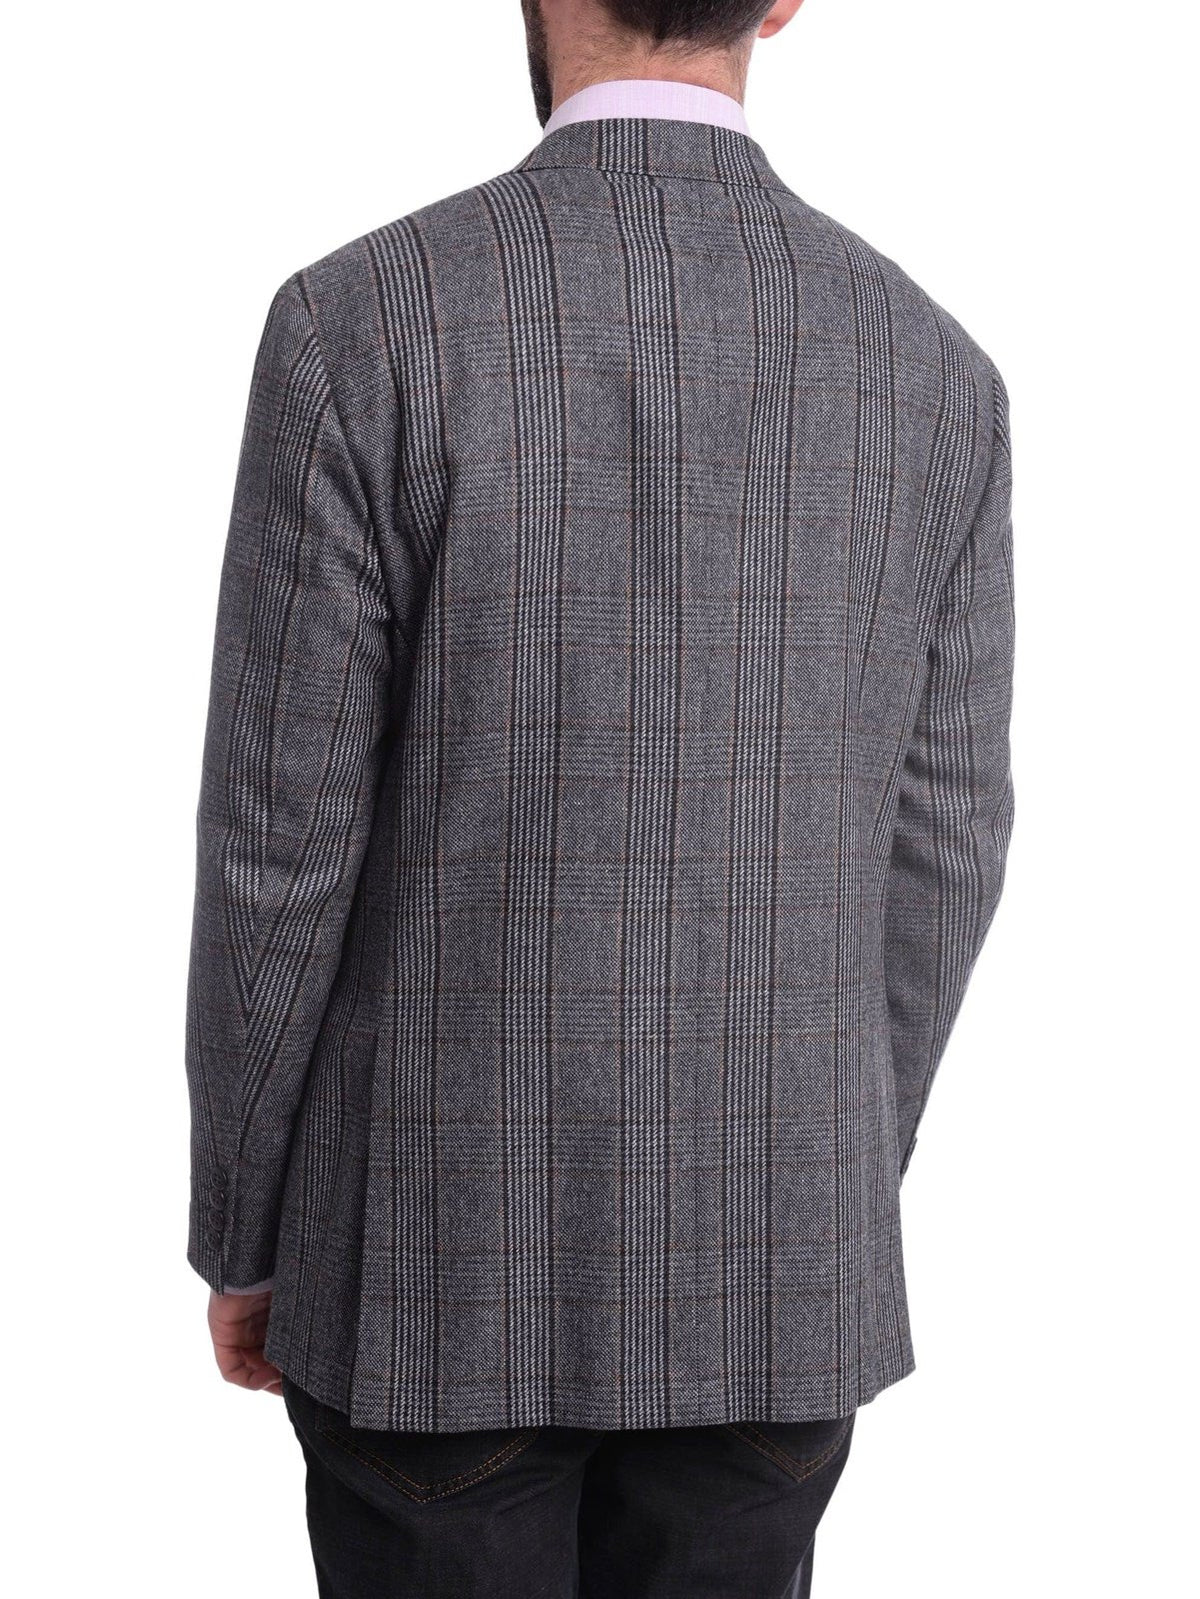 Napoli BLAZERS Napoli Classic Fit Blue Plaid Two Button Half Canvassed Wool Cahsmere Blazer